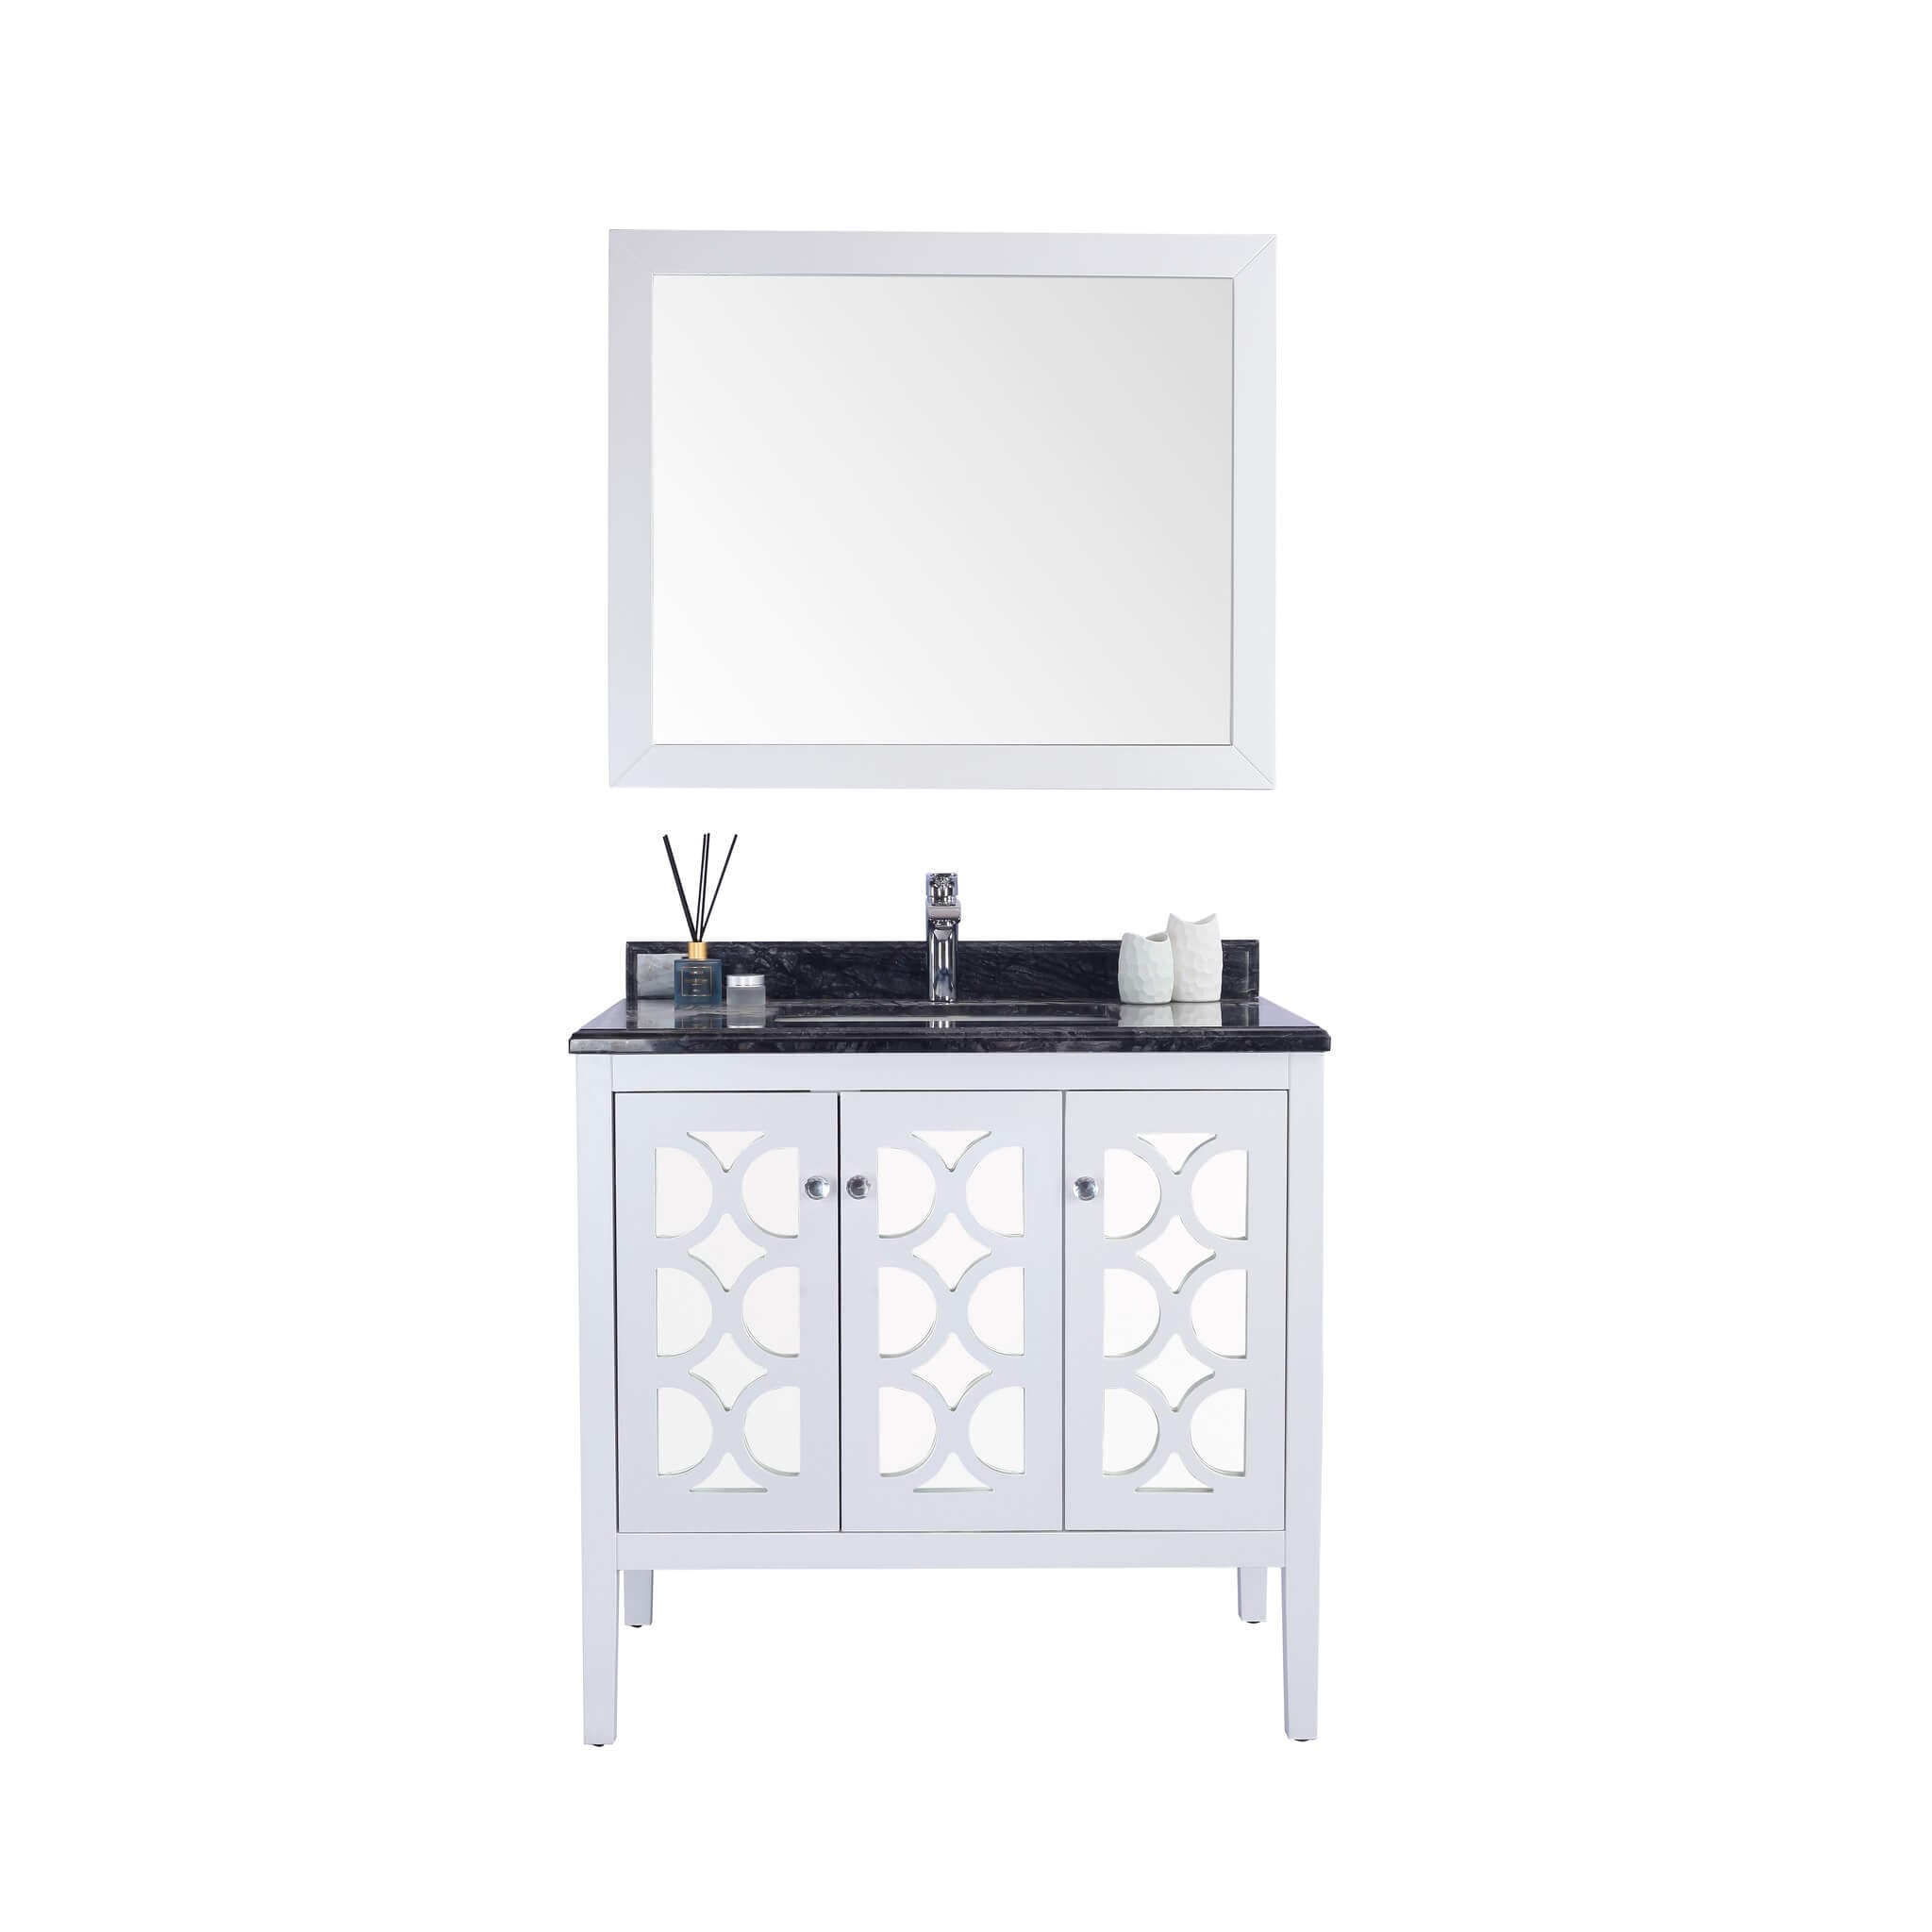 LAVIVA Mediterraneo 313MKSH-36W-BW 36" Single Bathroom Vanity in White with Black Wood Marble, White Rectangle Sink, Front View